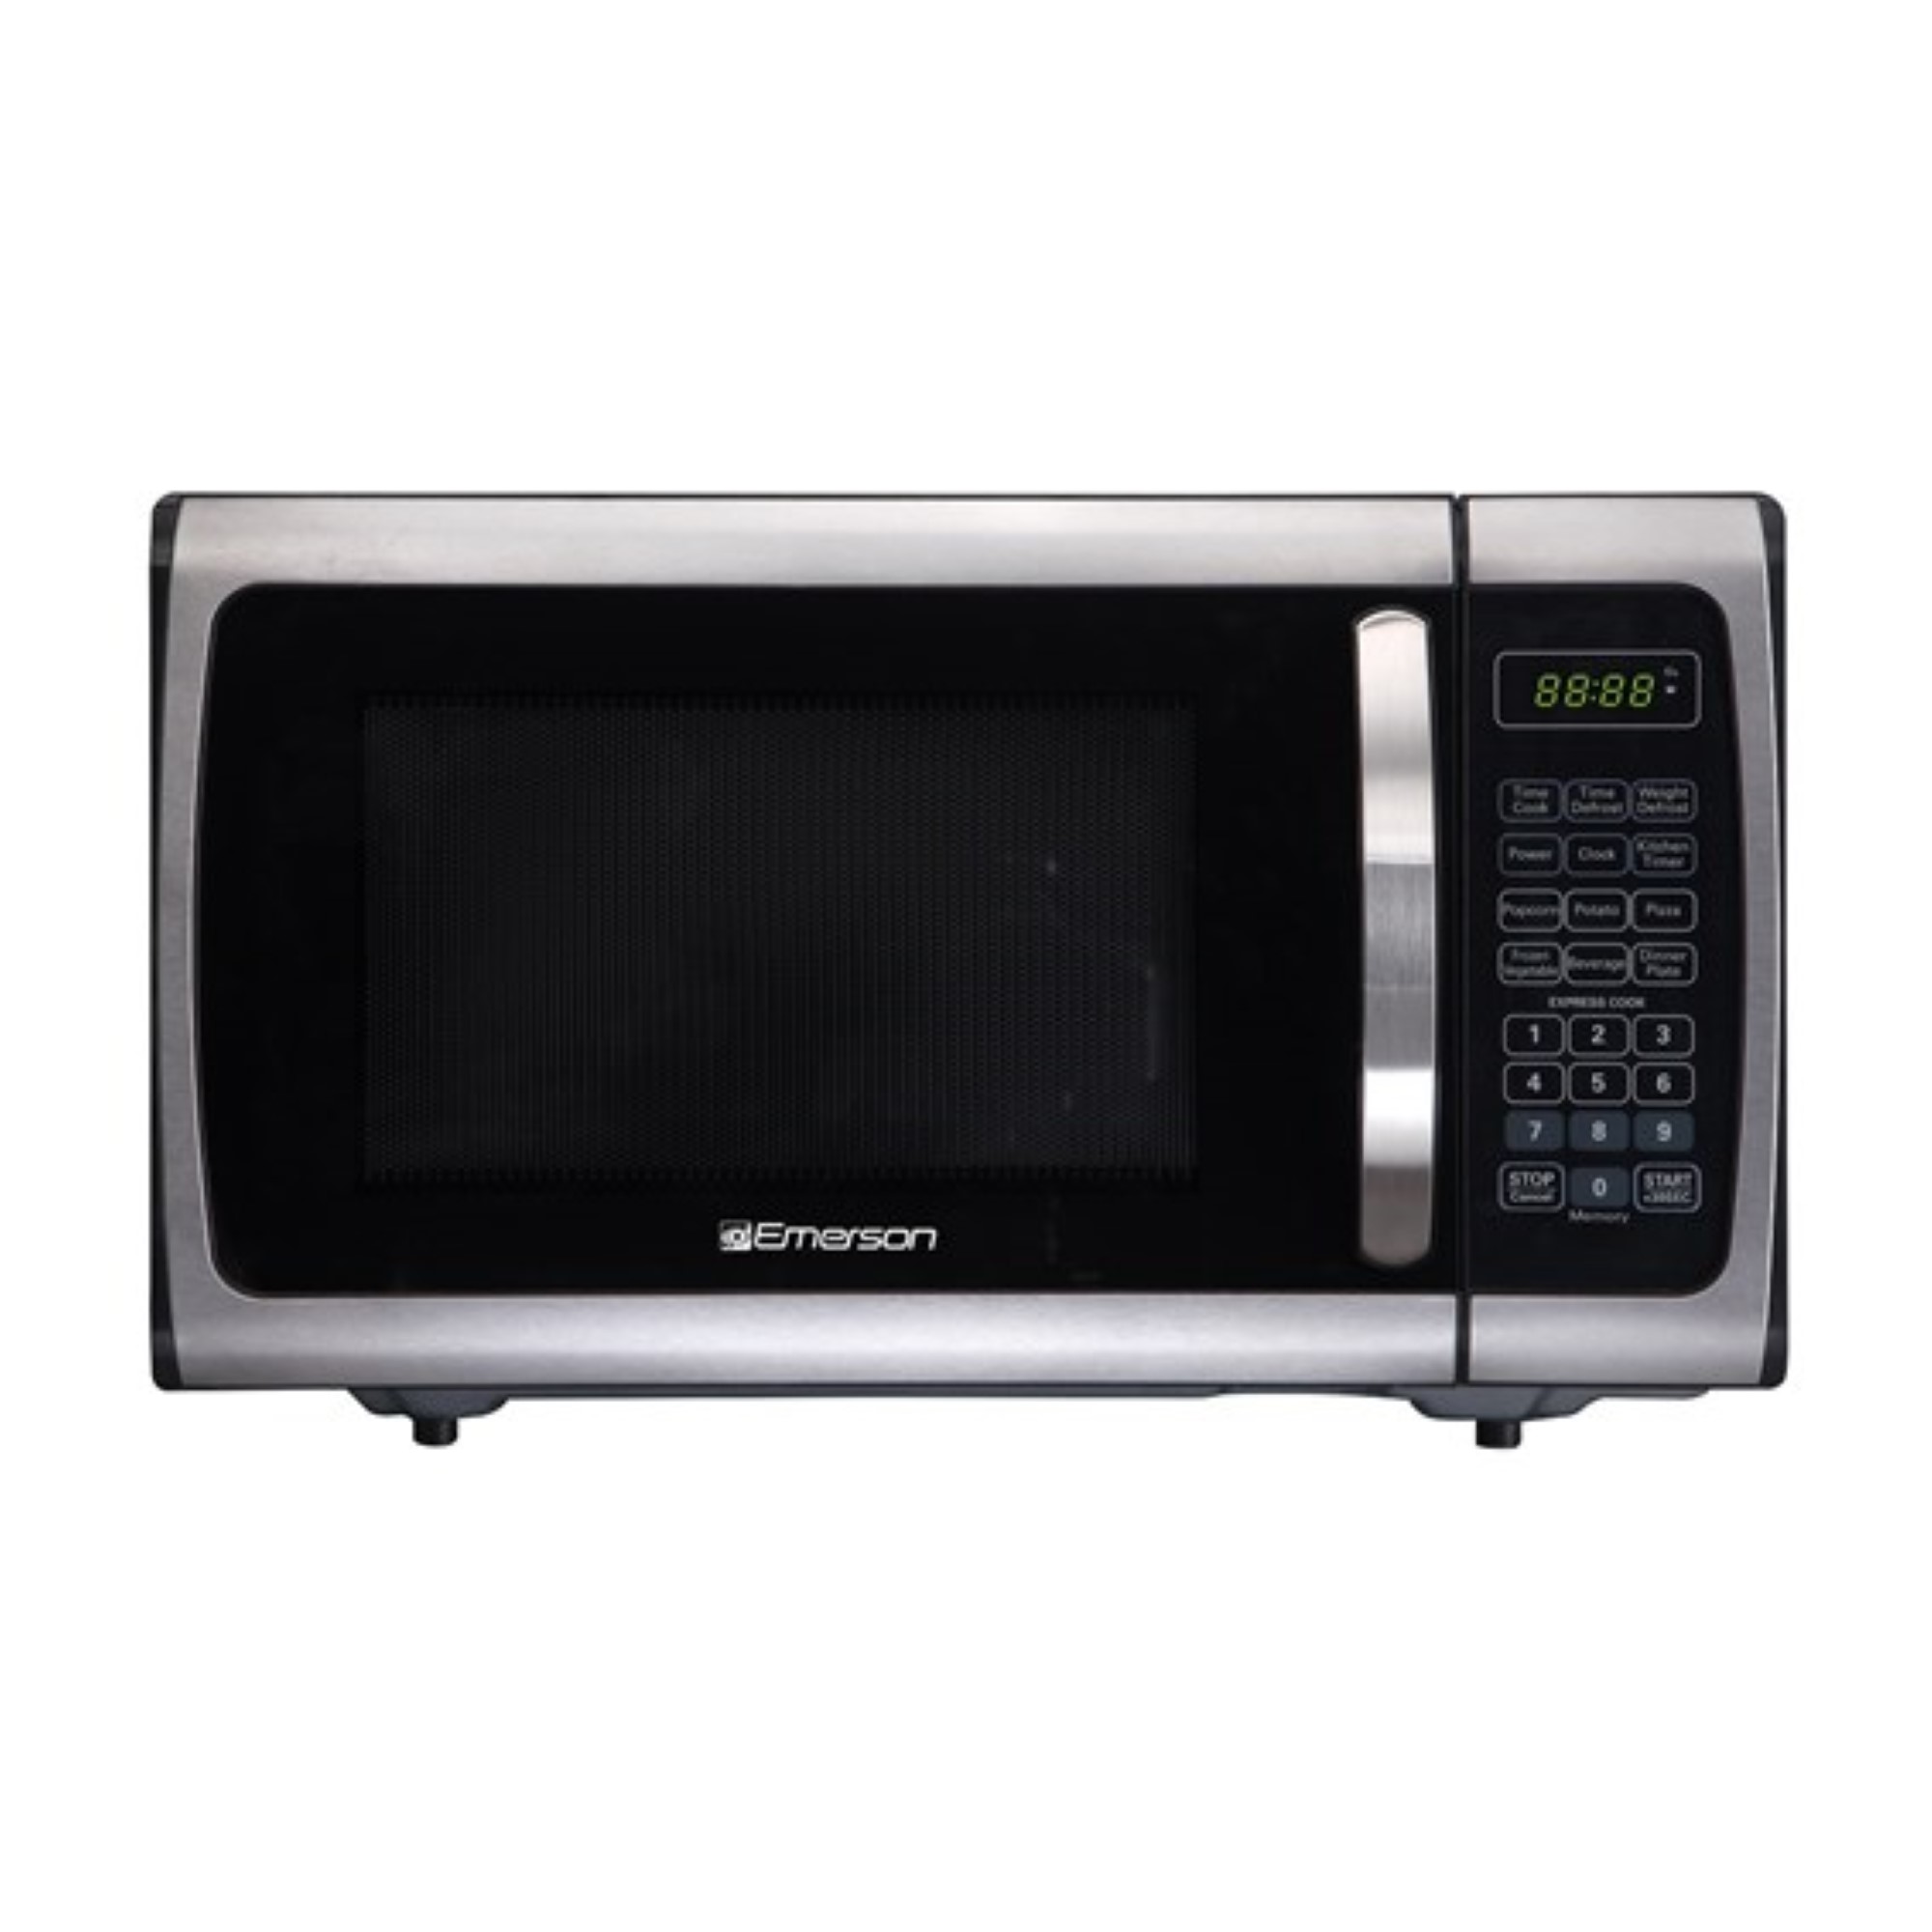 Emerson Mw8999rd 900 Watt Microwave Oven Red